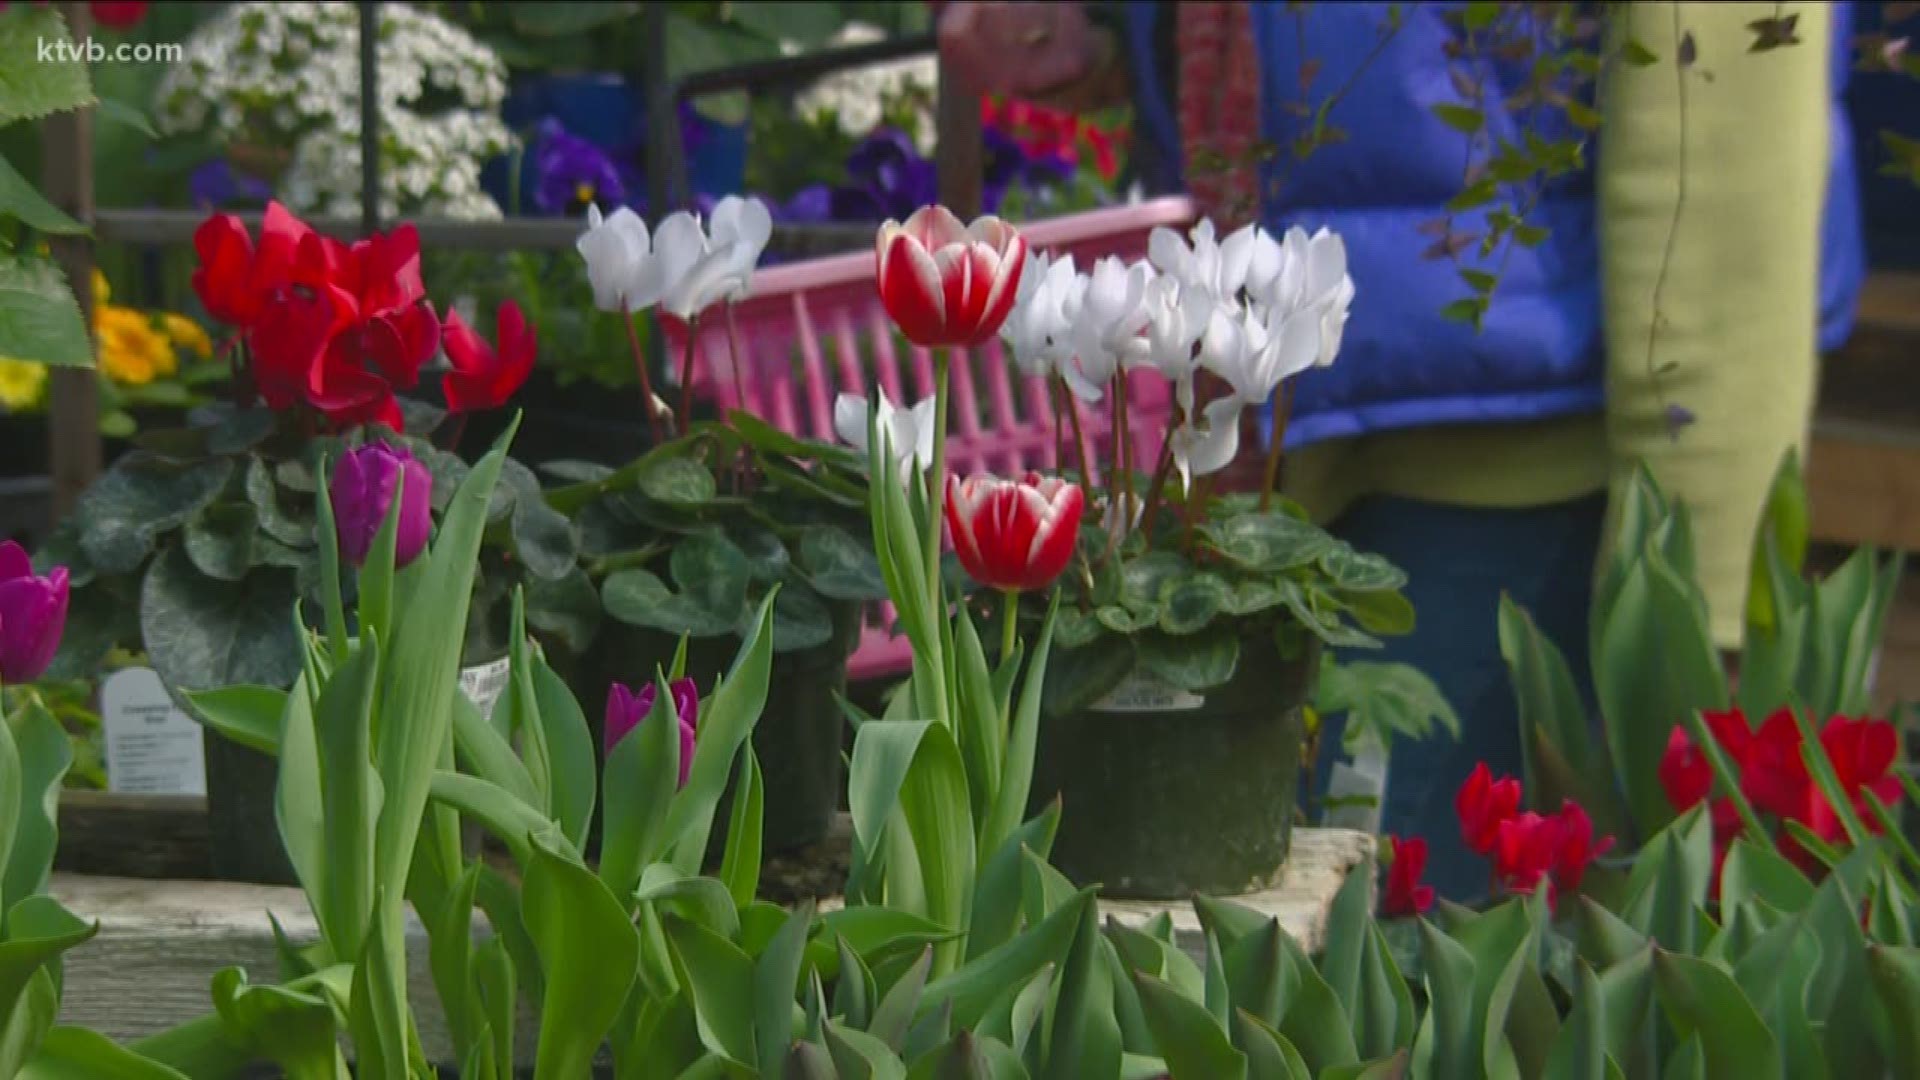 Jim Duthie shows us how to get a big splash of color in your plantings.